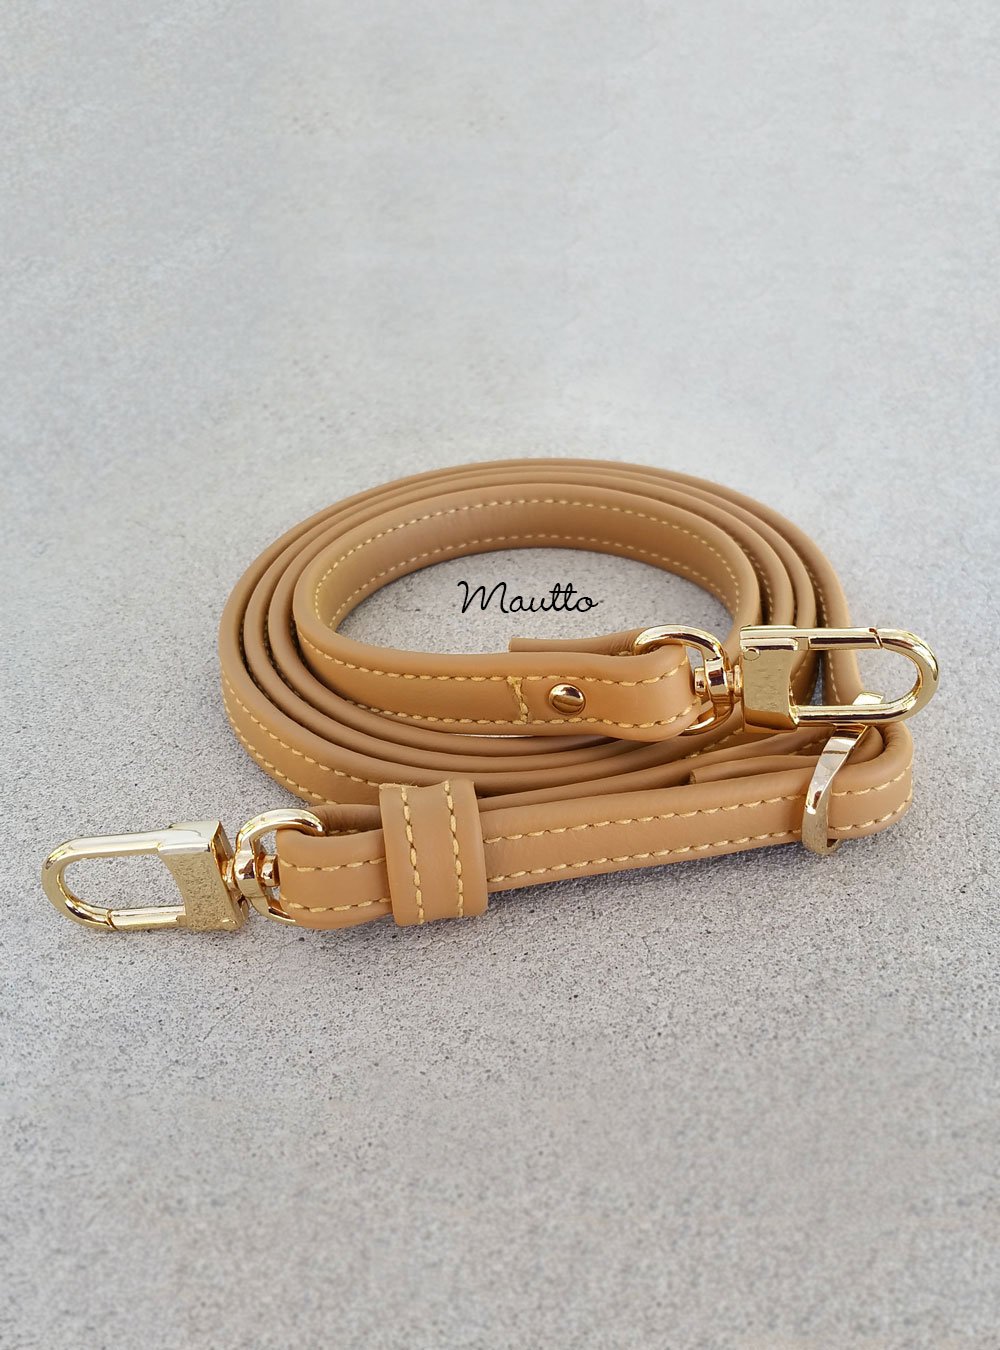 Replacement Purse Straps | IQS Executive